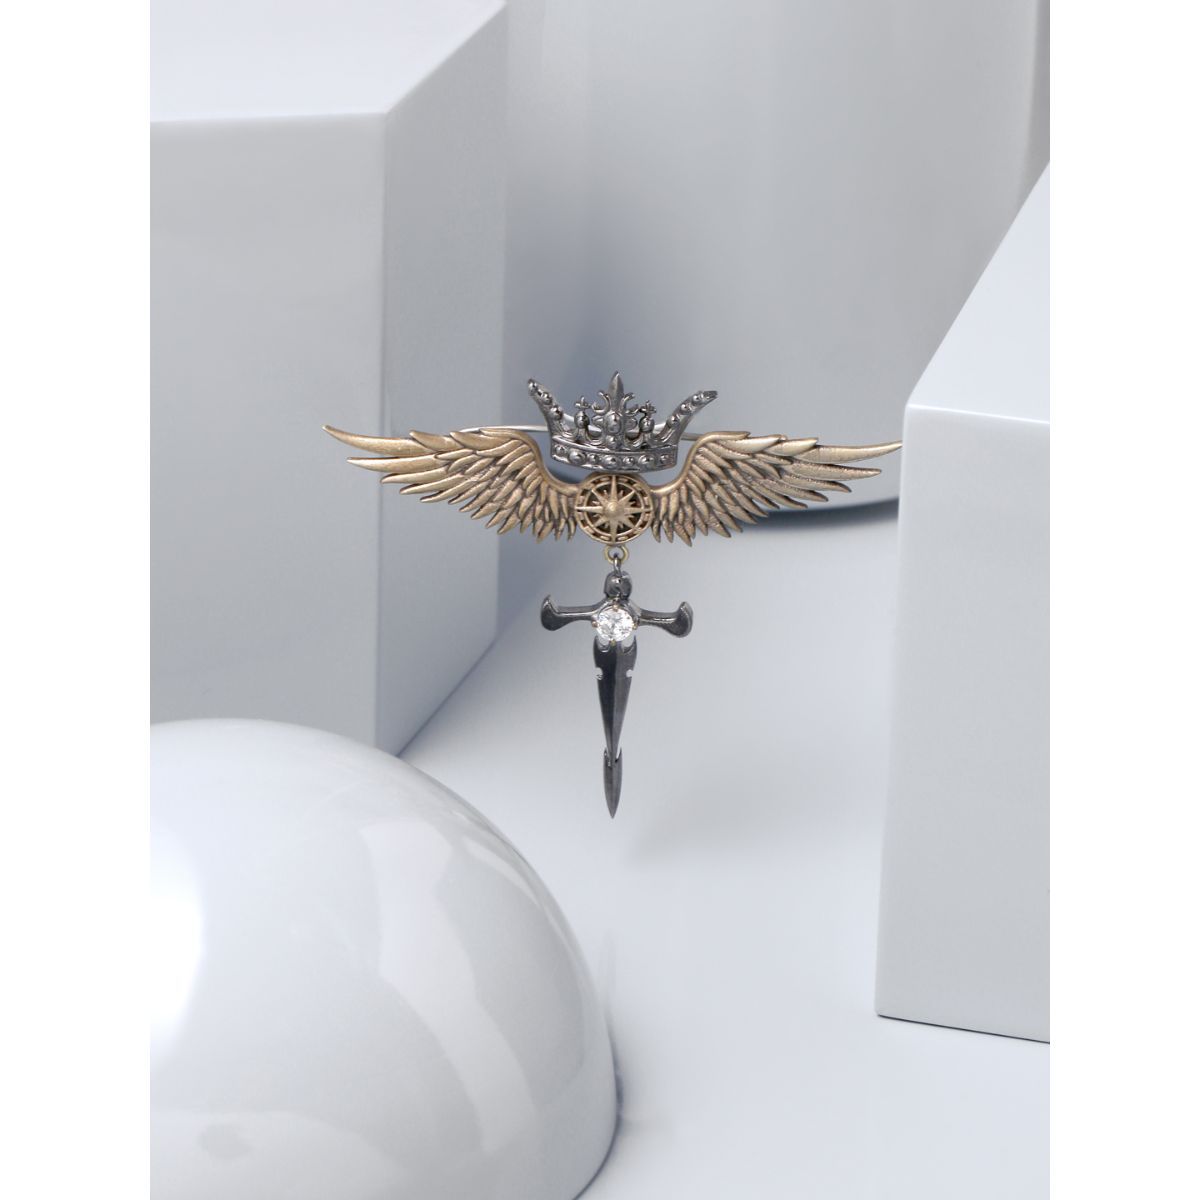 Cosa Nostraa The Crowned Phoenix brooch